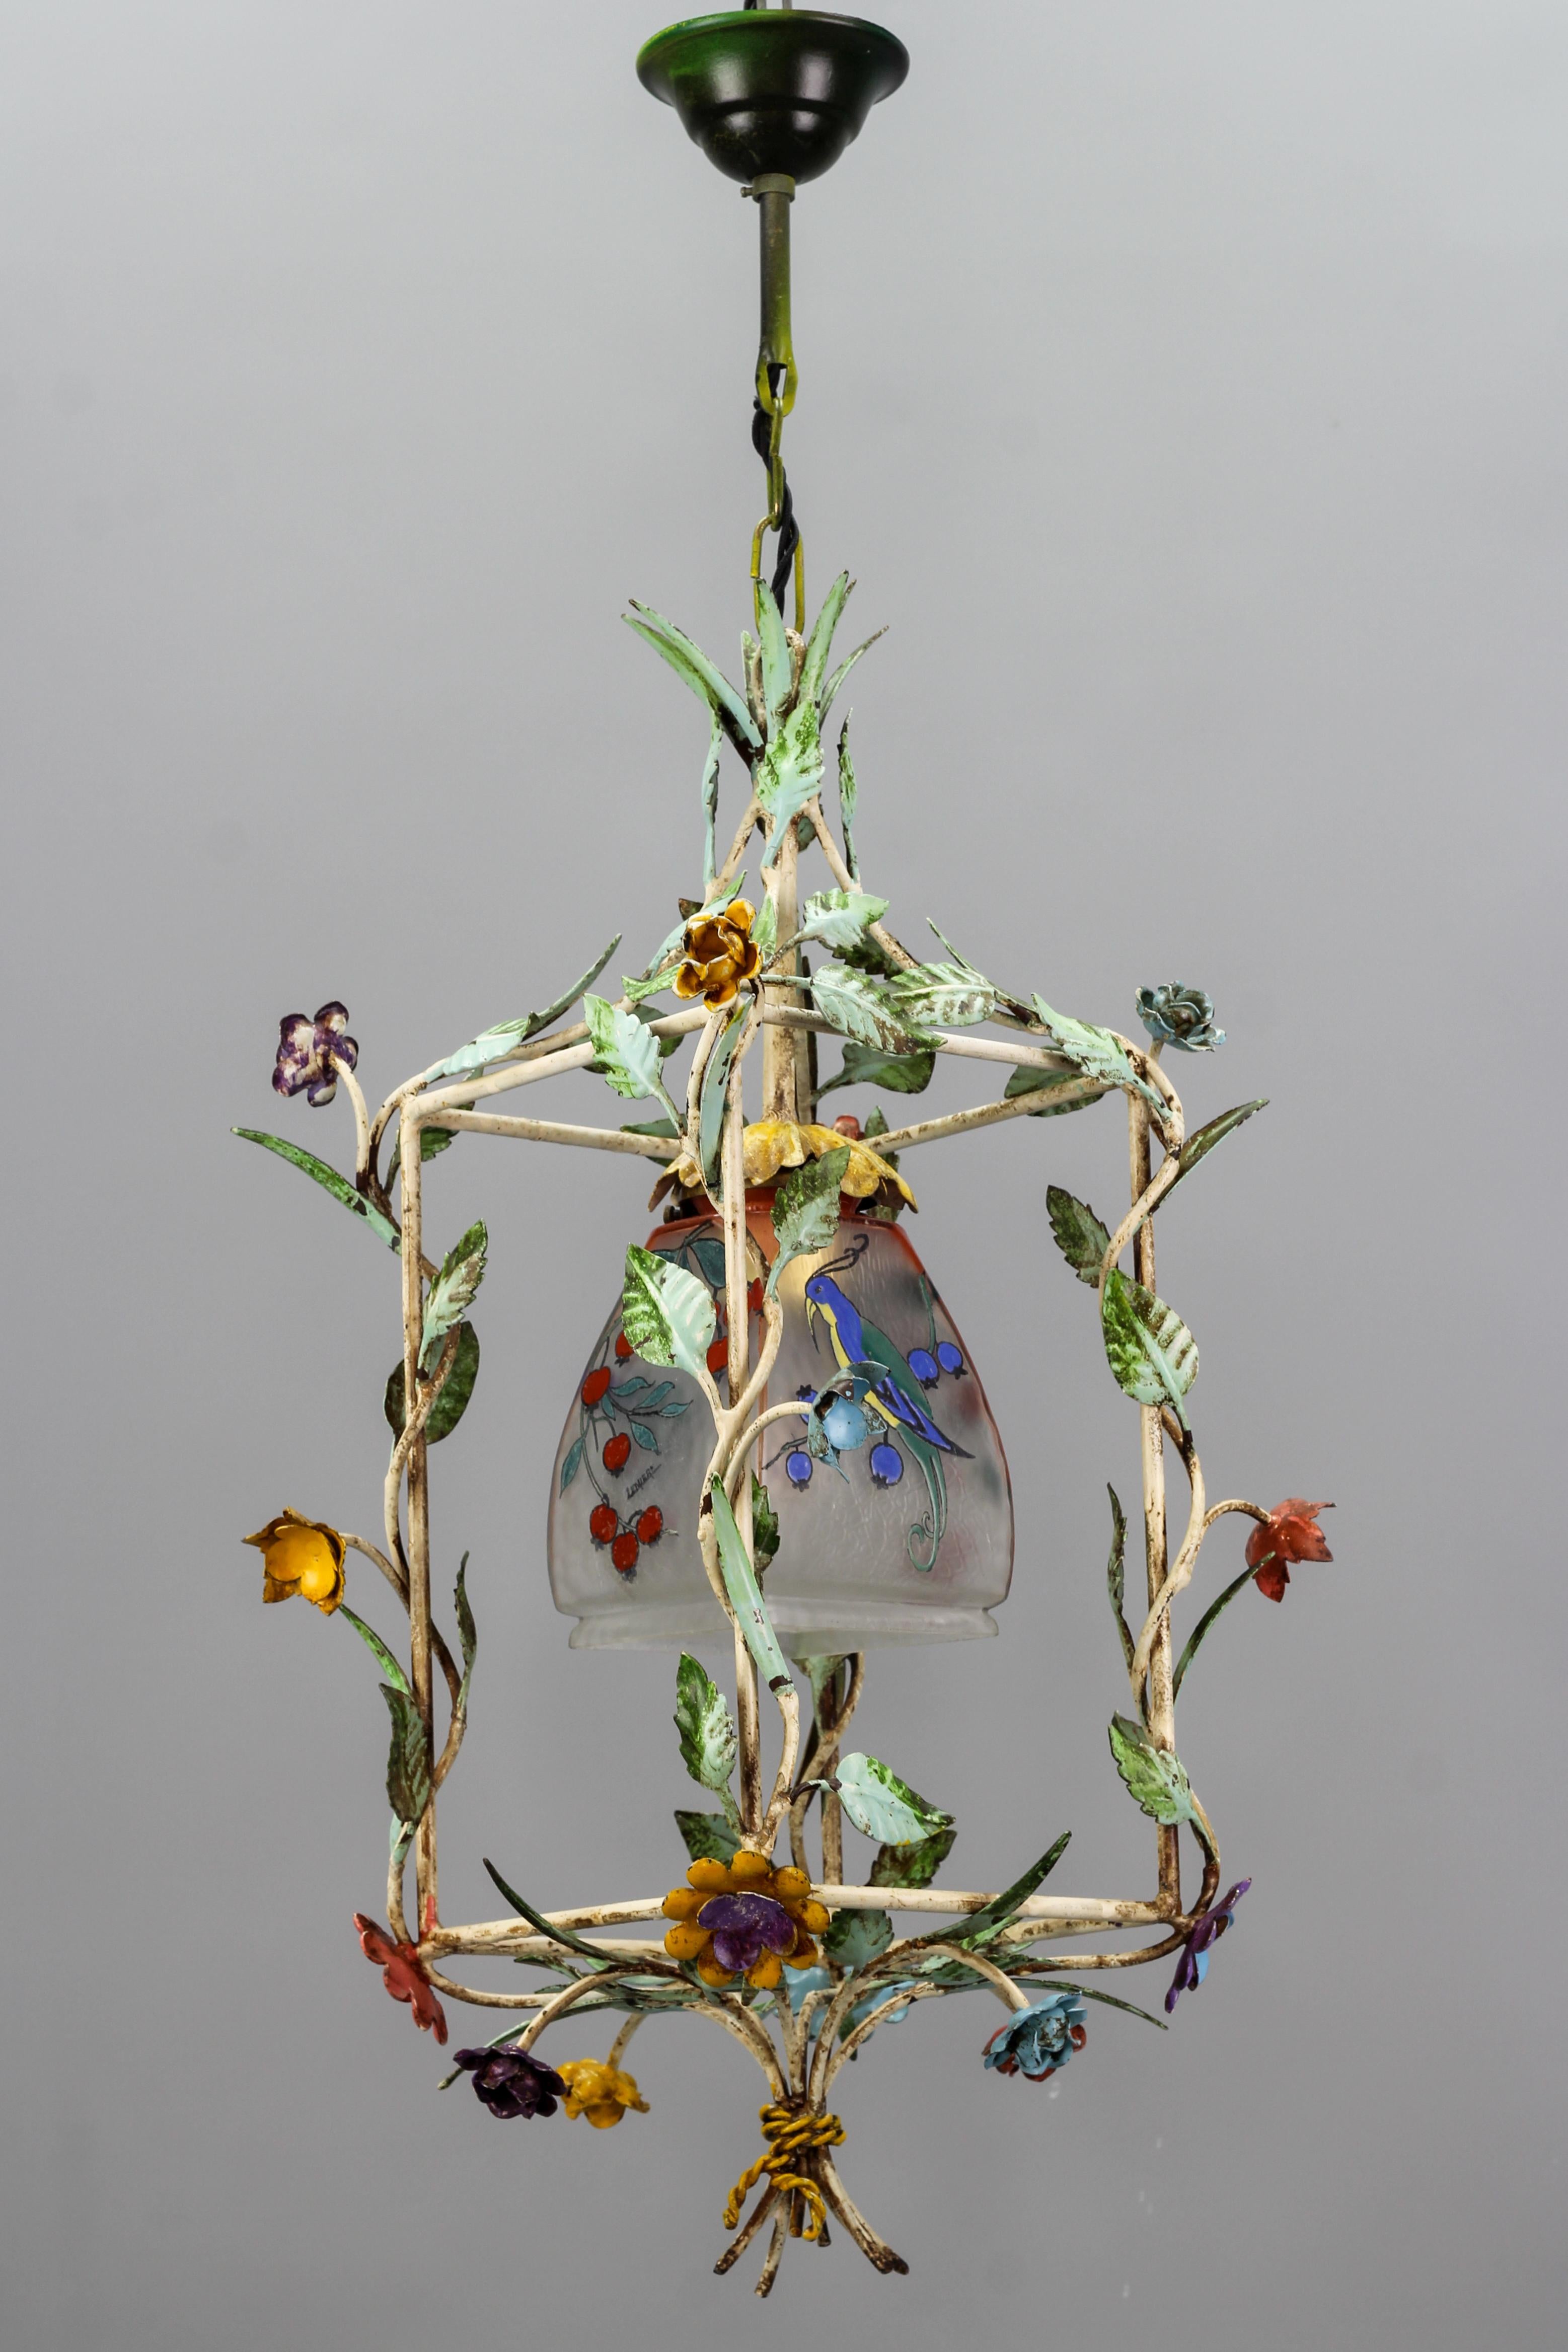 Metal French Tole and Glass Polychrome Pastel Flower Cage Pendant Light, 1950s For Sale